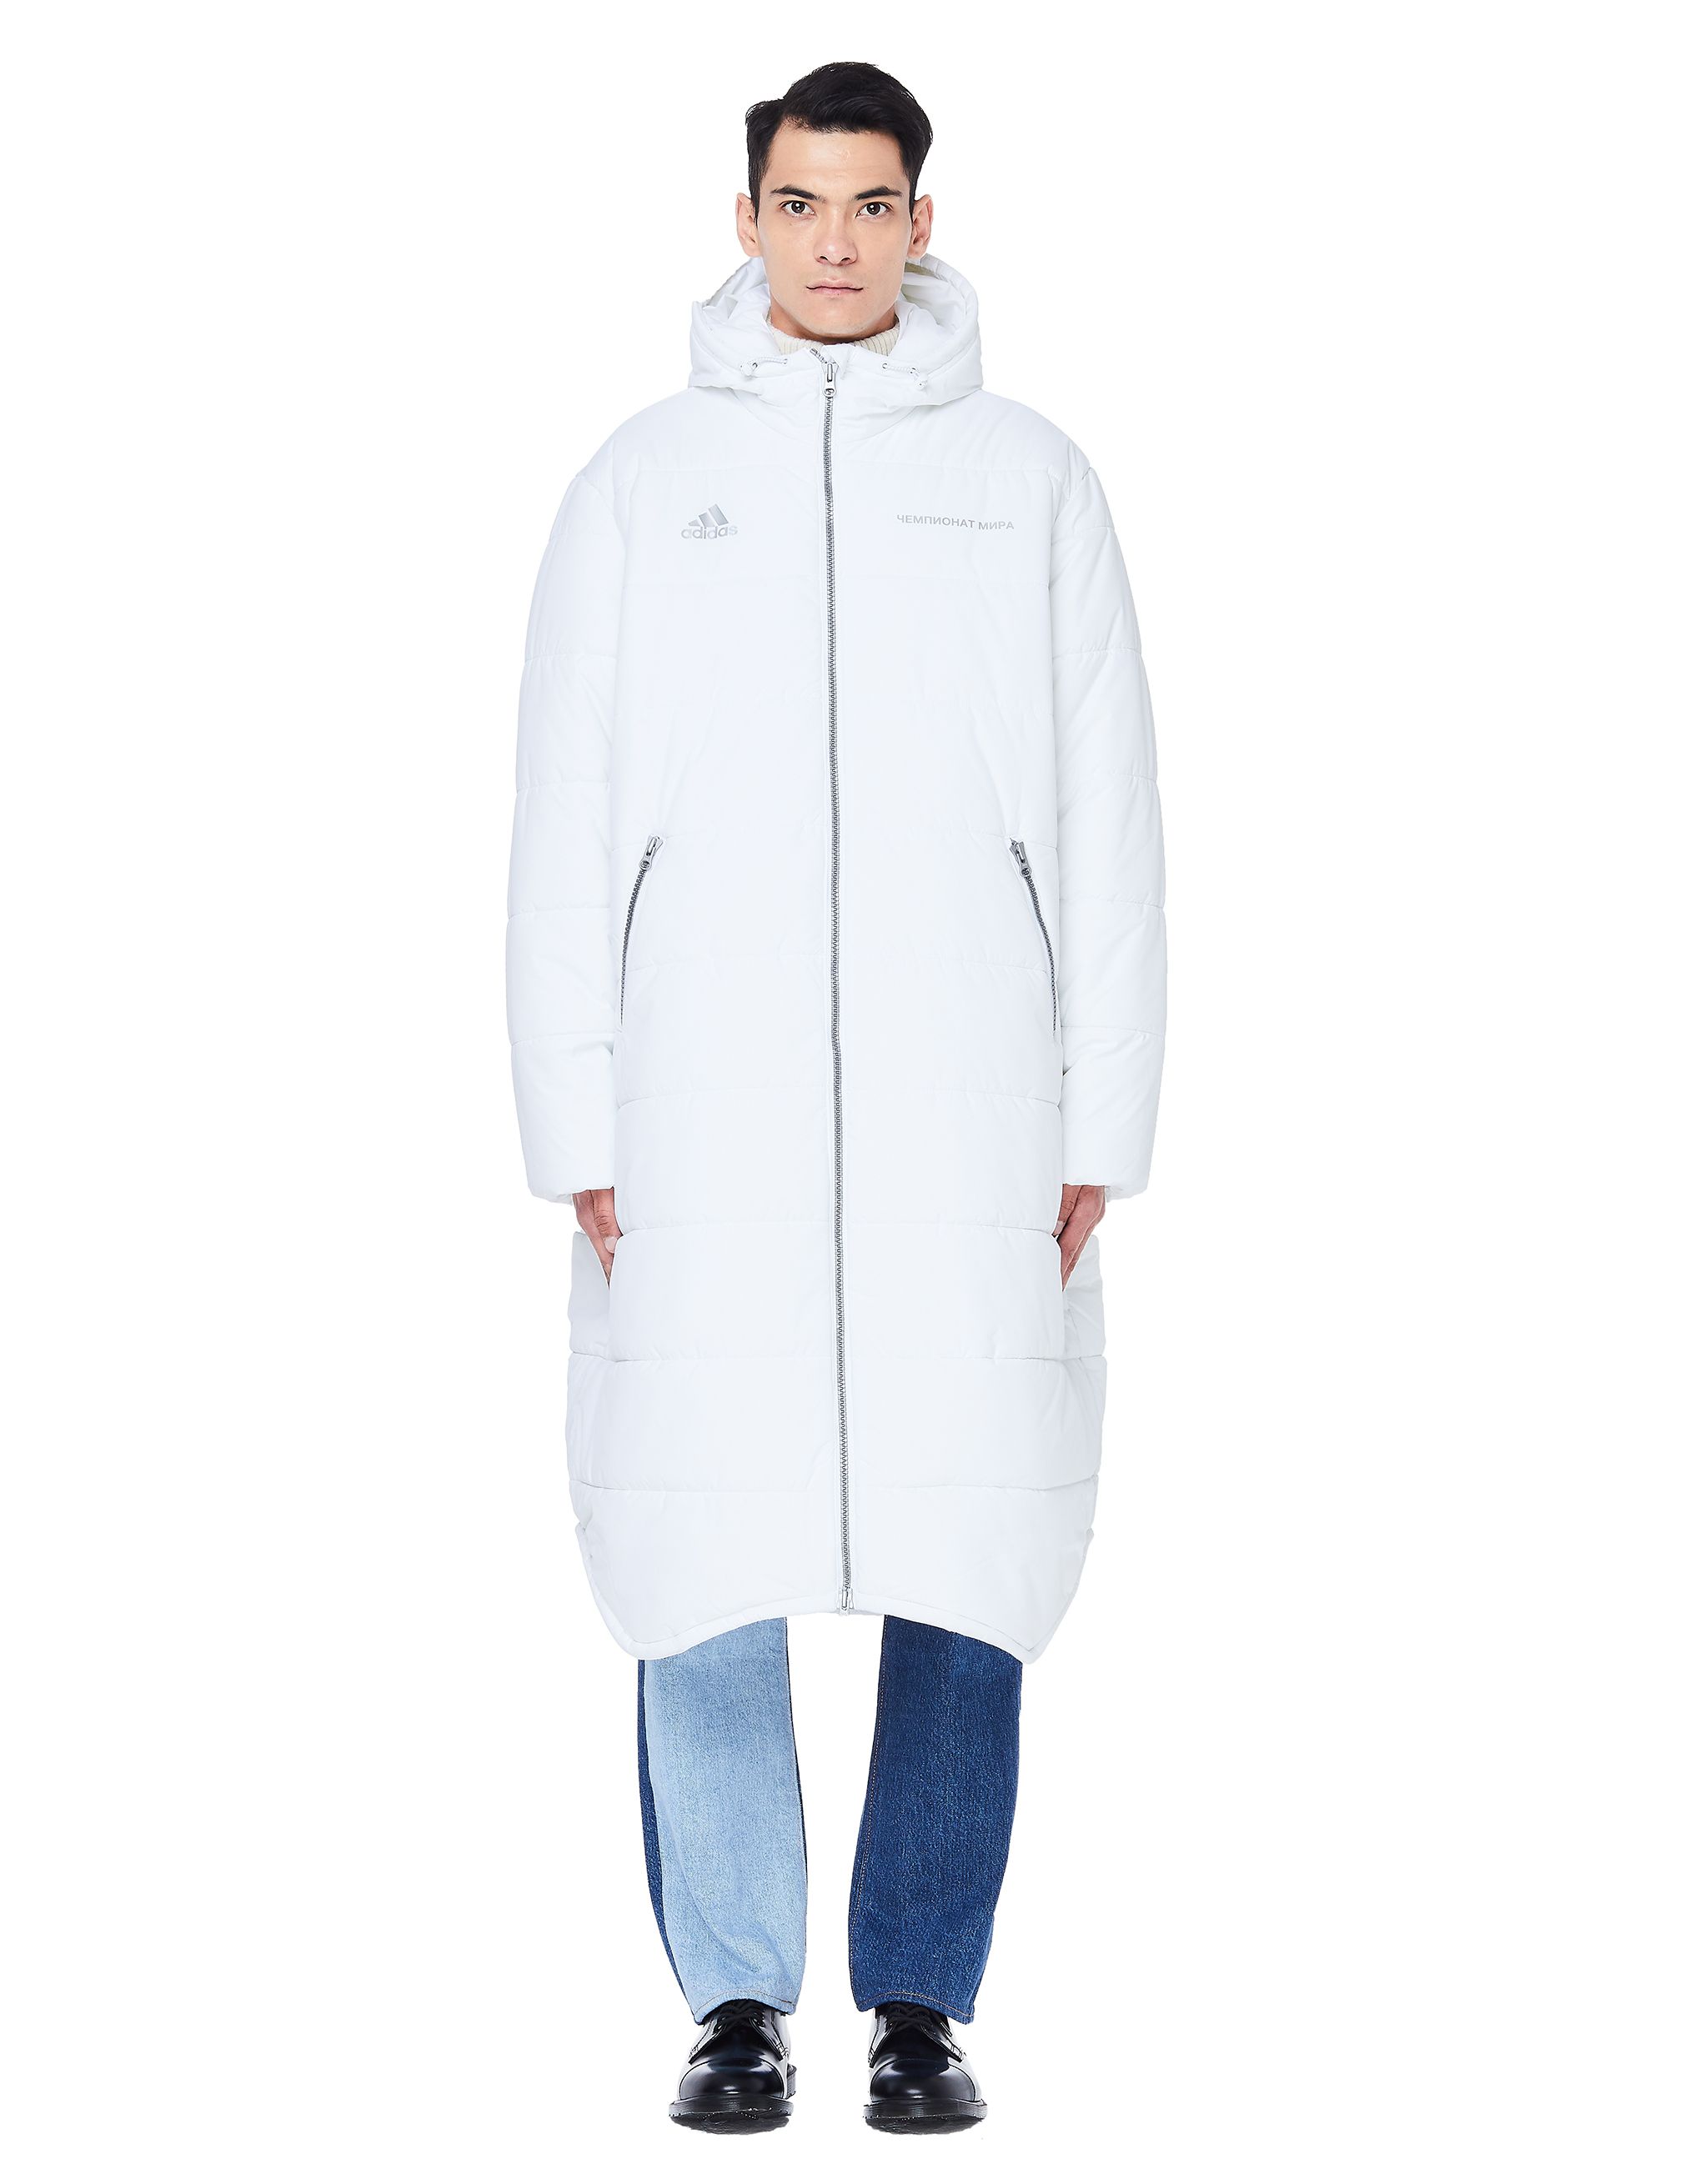 White Long Puffer Jacket | SVMoscow